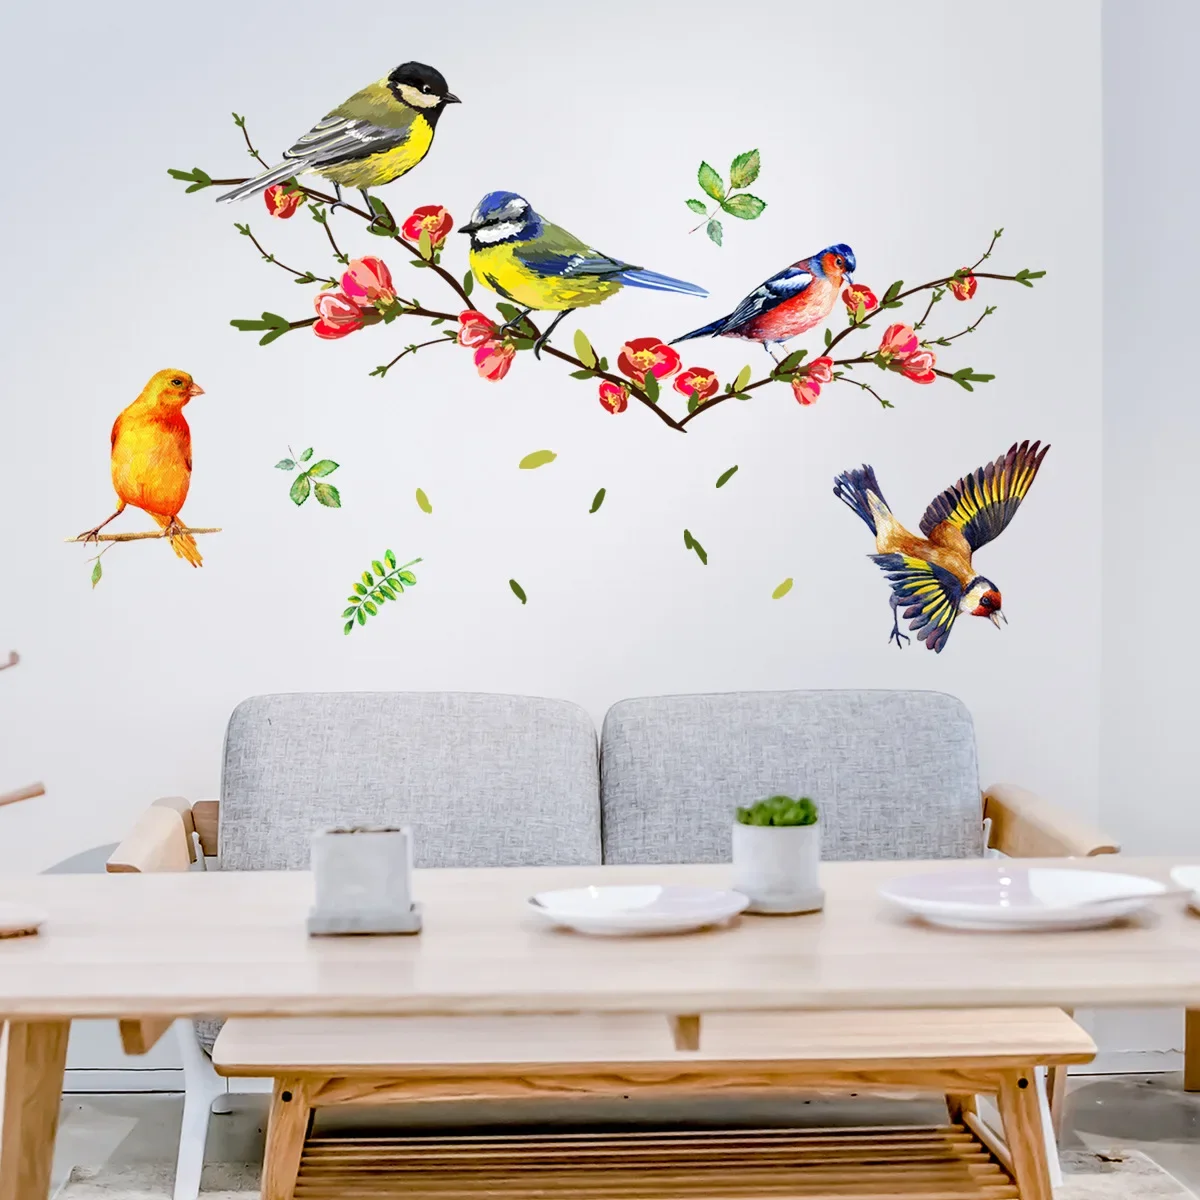 

Tree Wall Stickers Birds Flower Home Room Decor Wallpapers for Living Room Bedroom DIY Wall Art House Interior Decoration